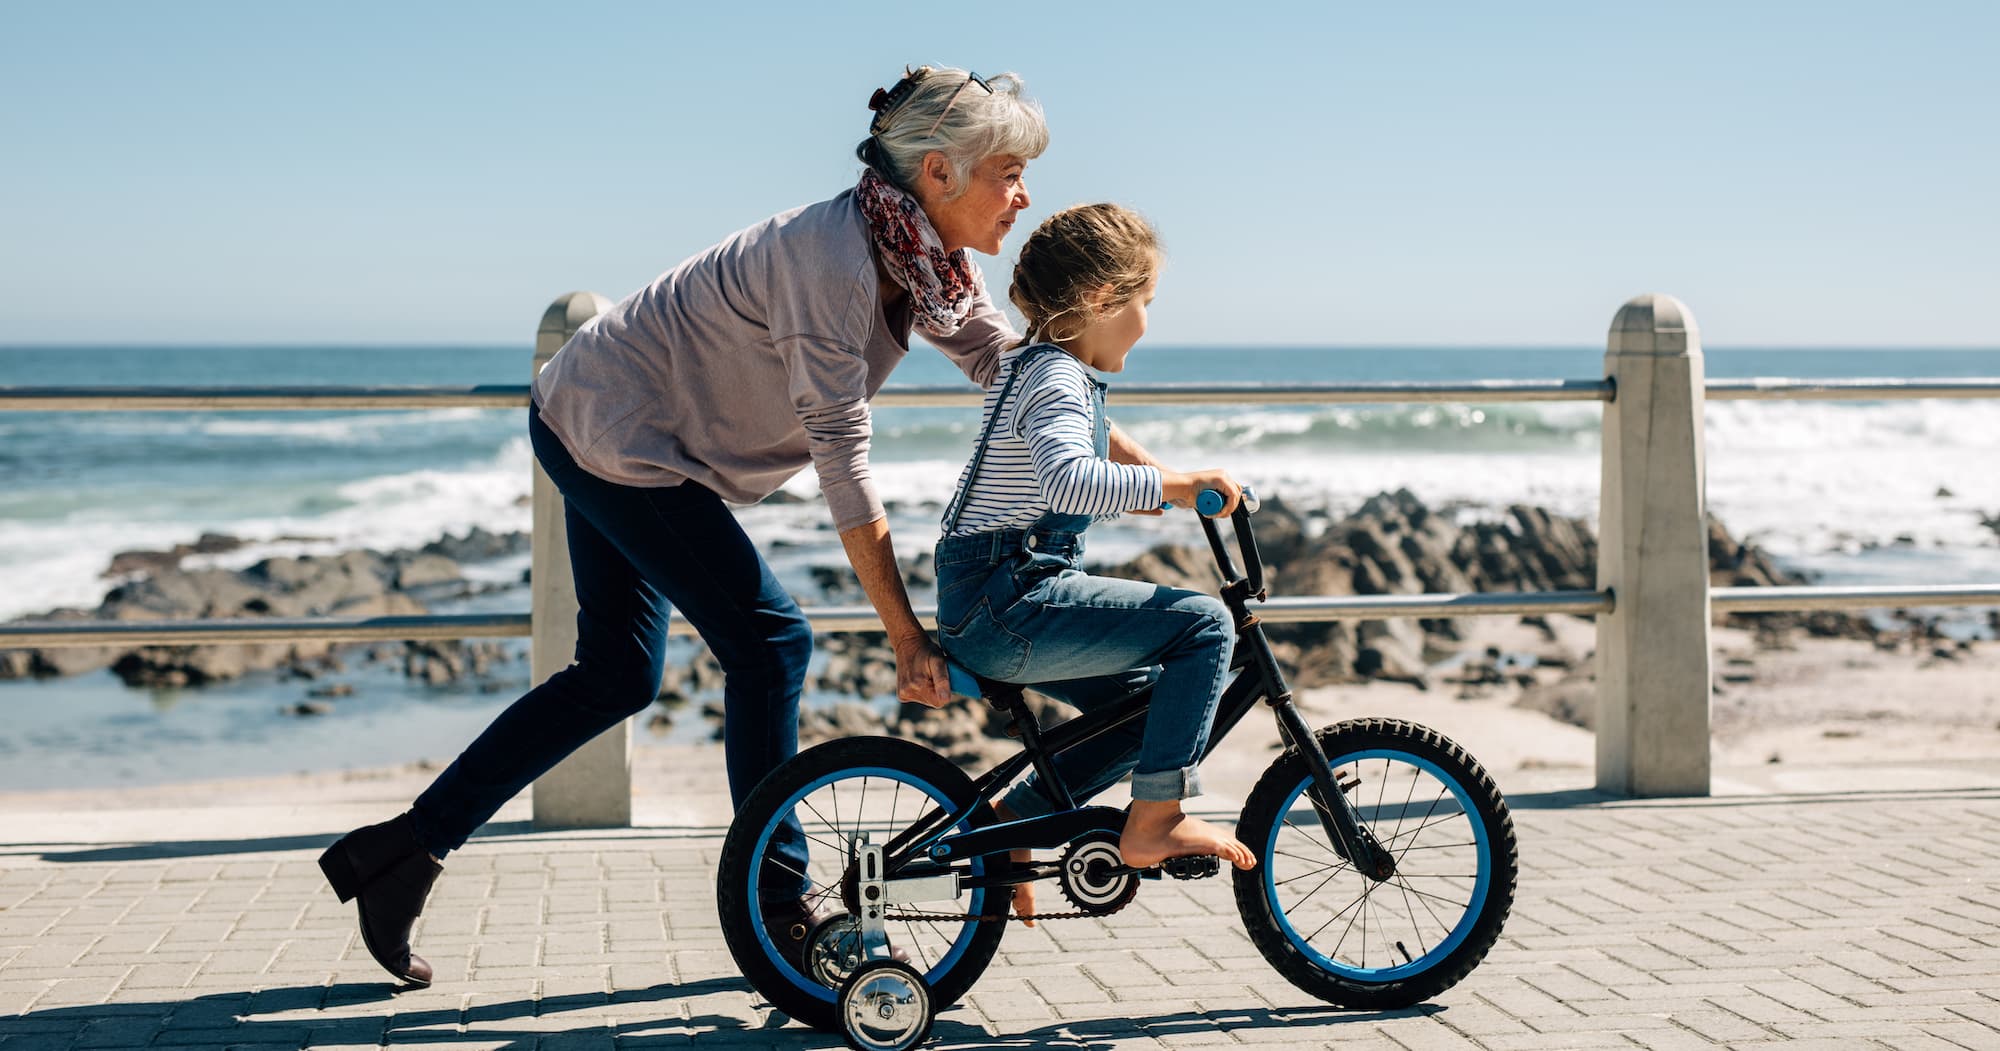 Side view of a girl riding a bicycle while her grandmother runs along holding the kid. Senior woman teaching a small girl to ride a bicycle on the road alongside the beach.